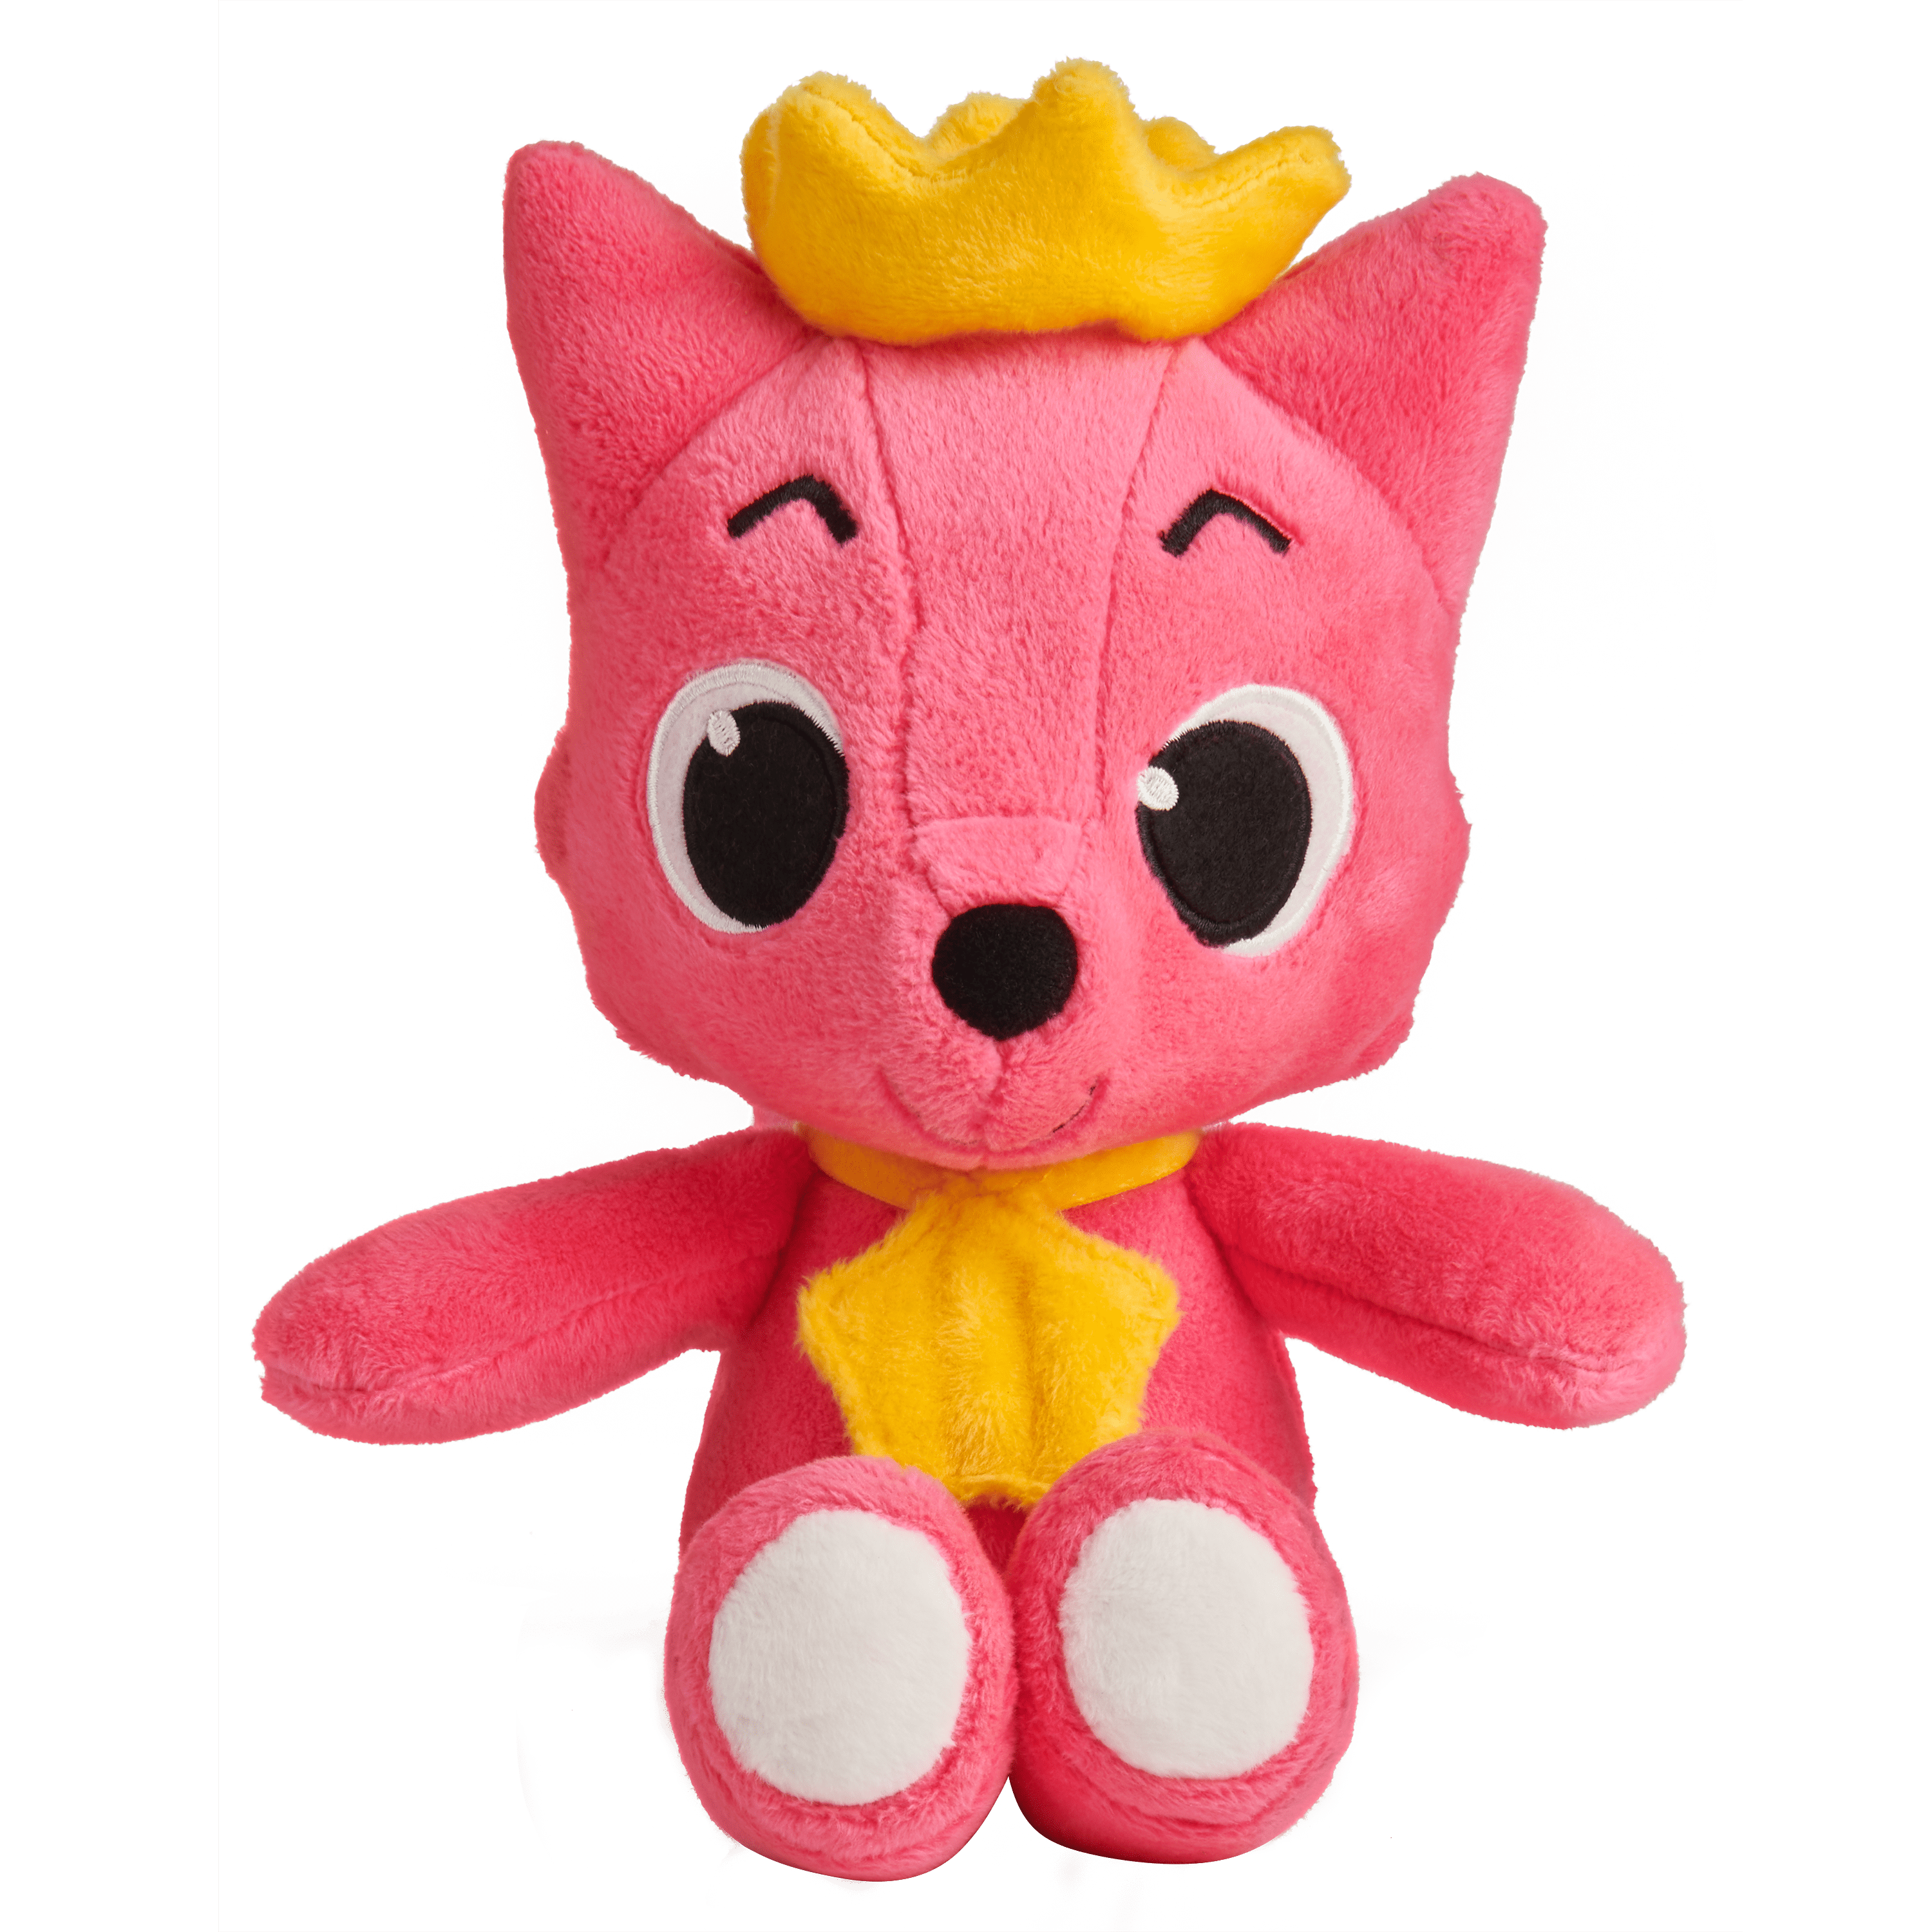 PINKFONG Safety Packing Pinkfong Cute Big Head Doll 29cm Pink Stuffed Toy 